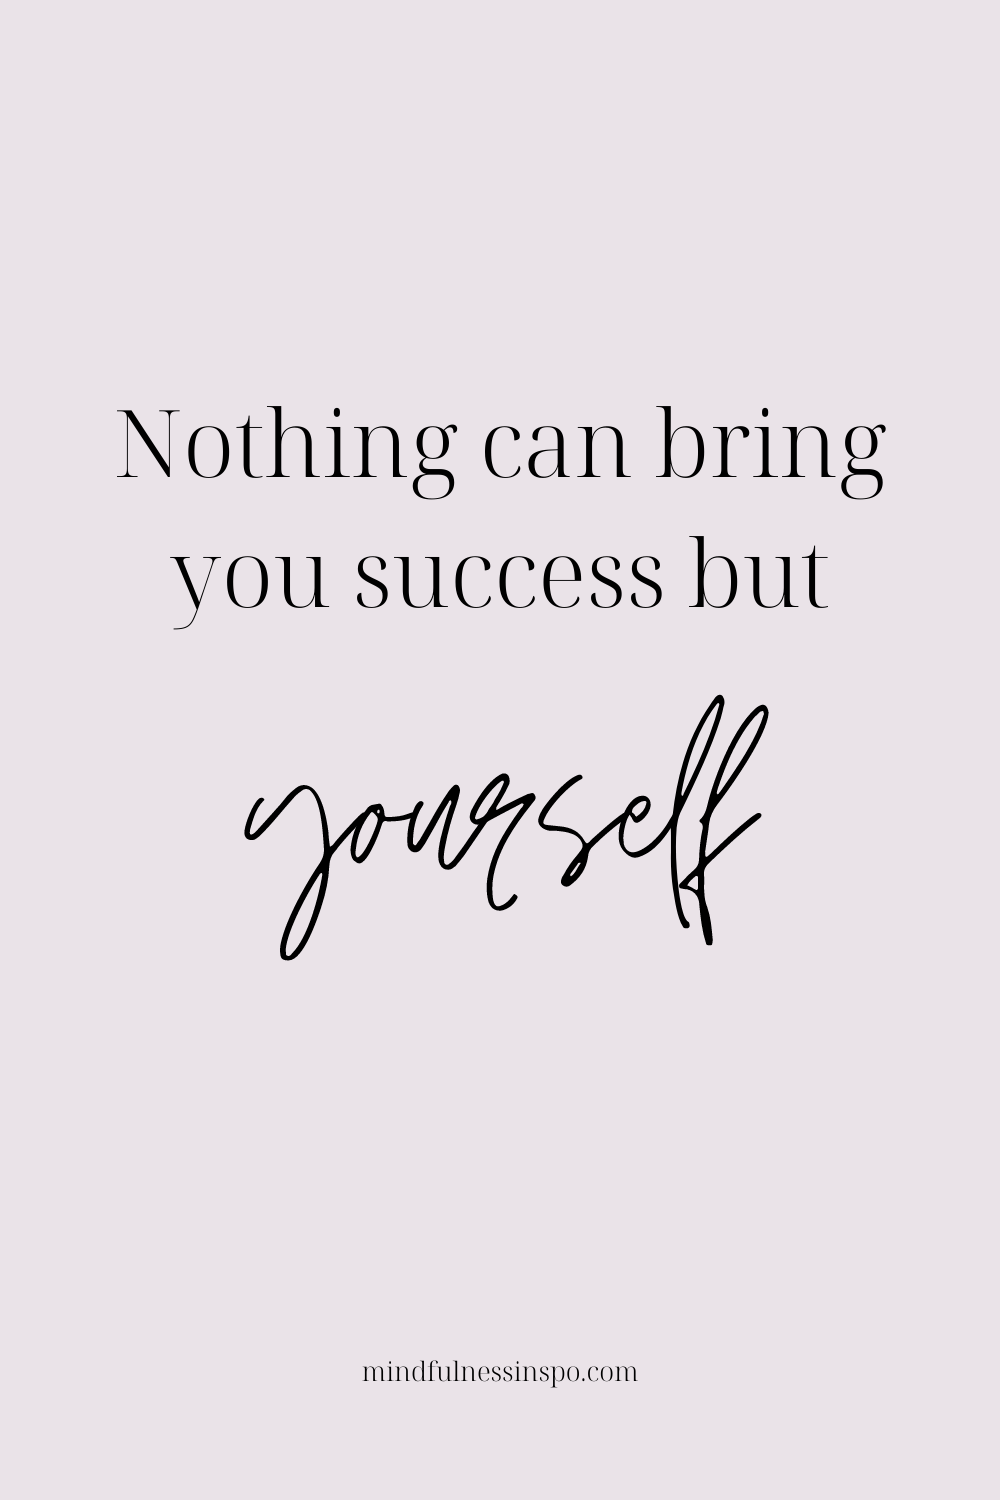 motivational wallpaper: nothing can bring you success but yourself. more on mindfulnessinspo.com